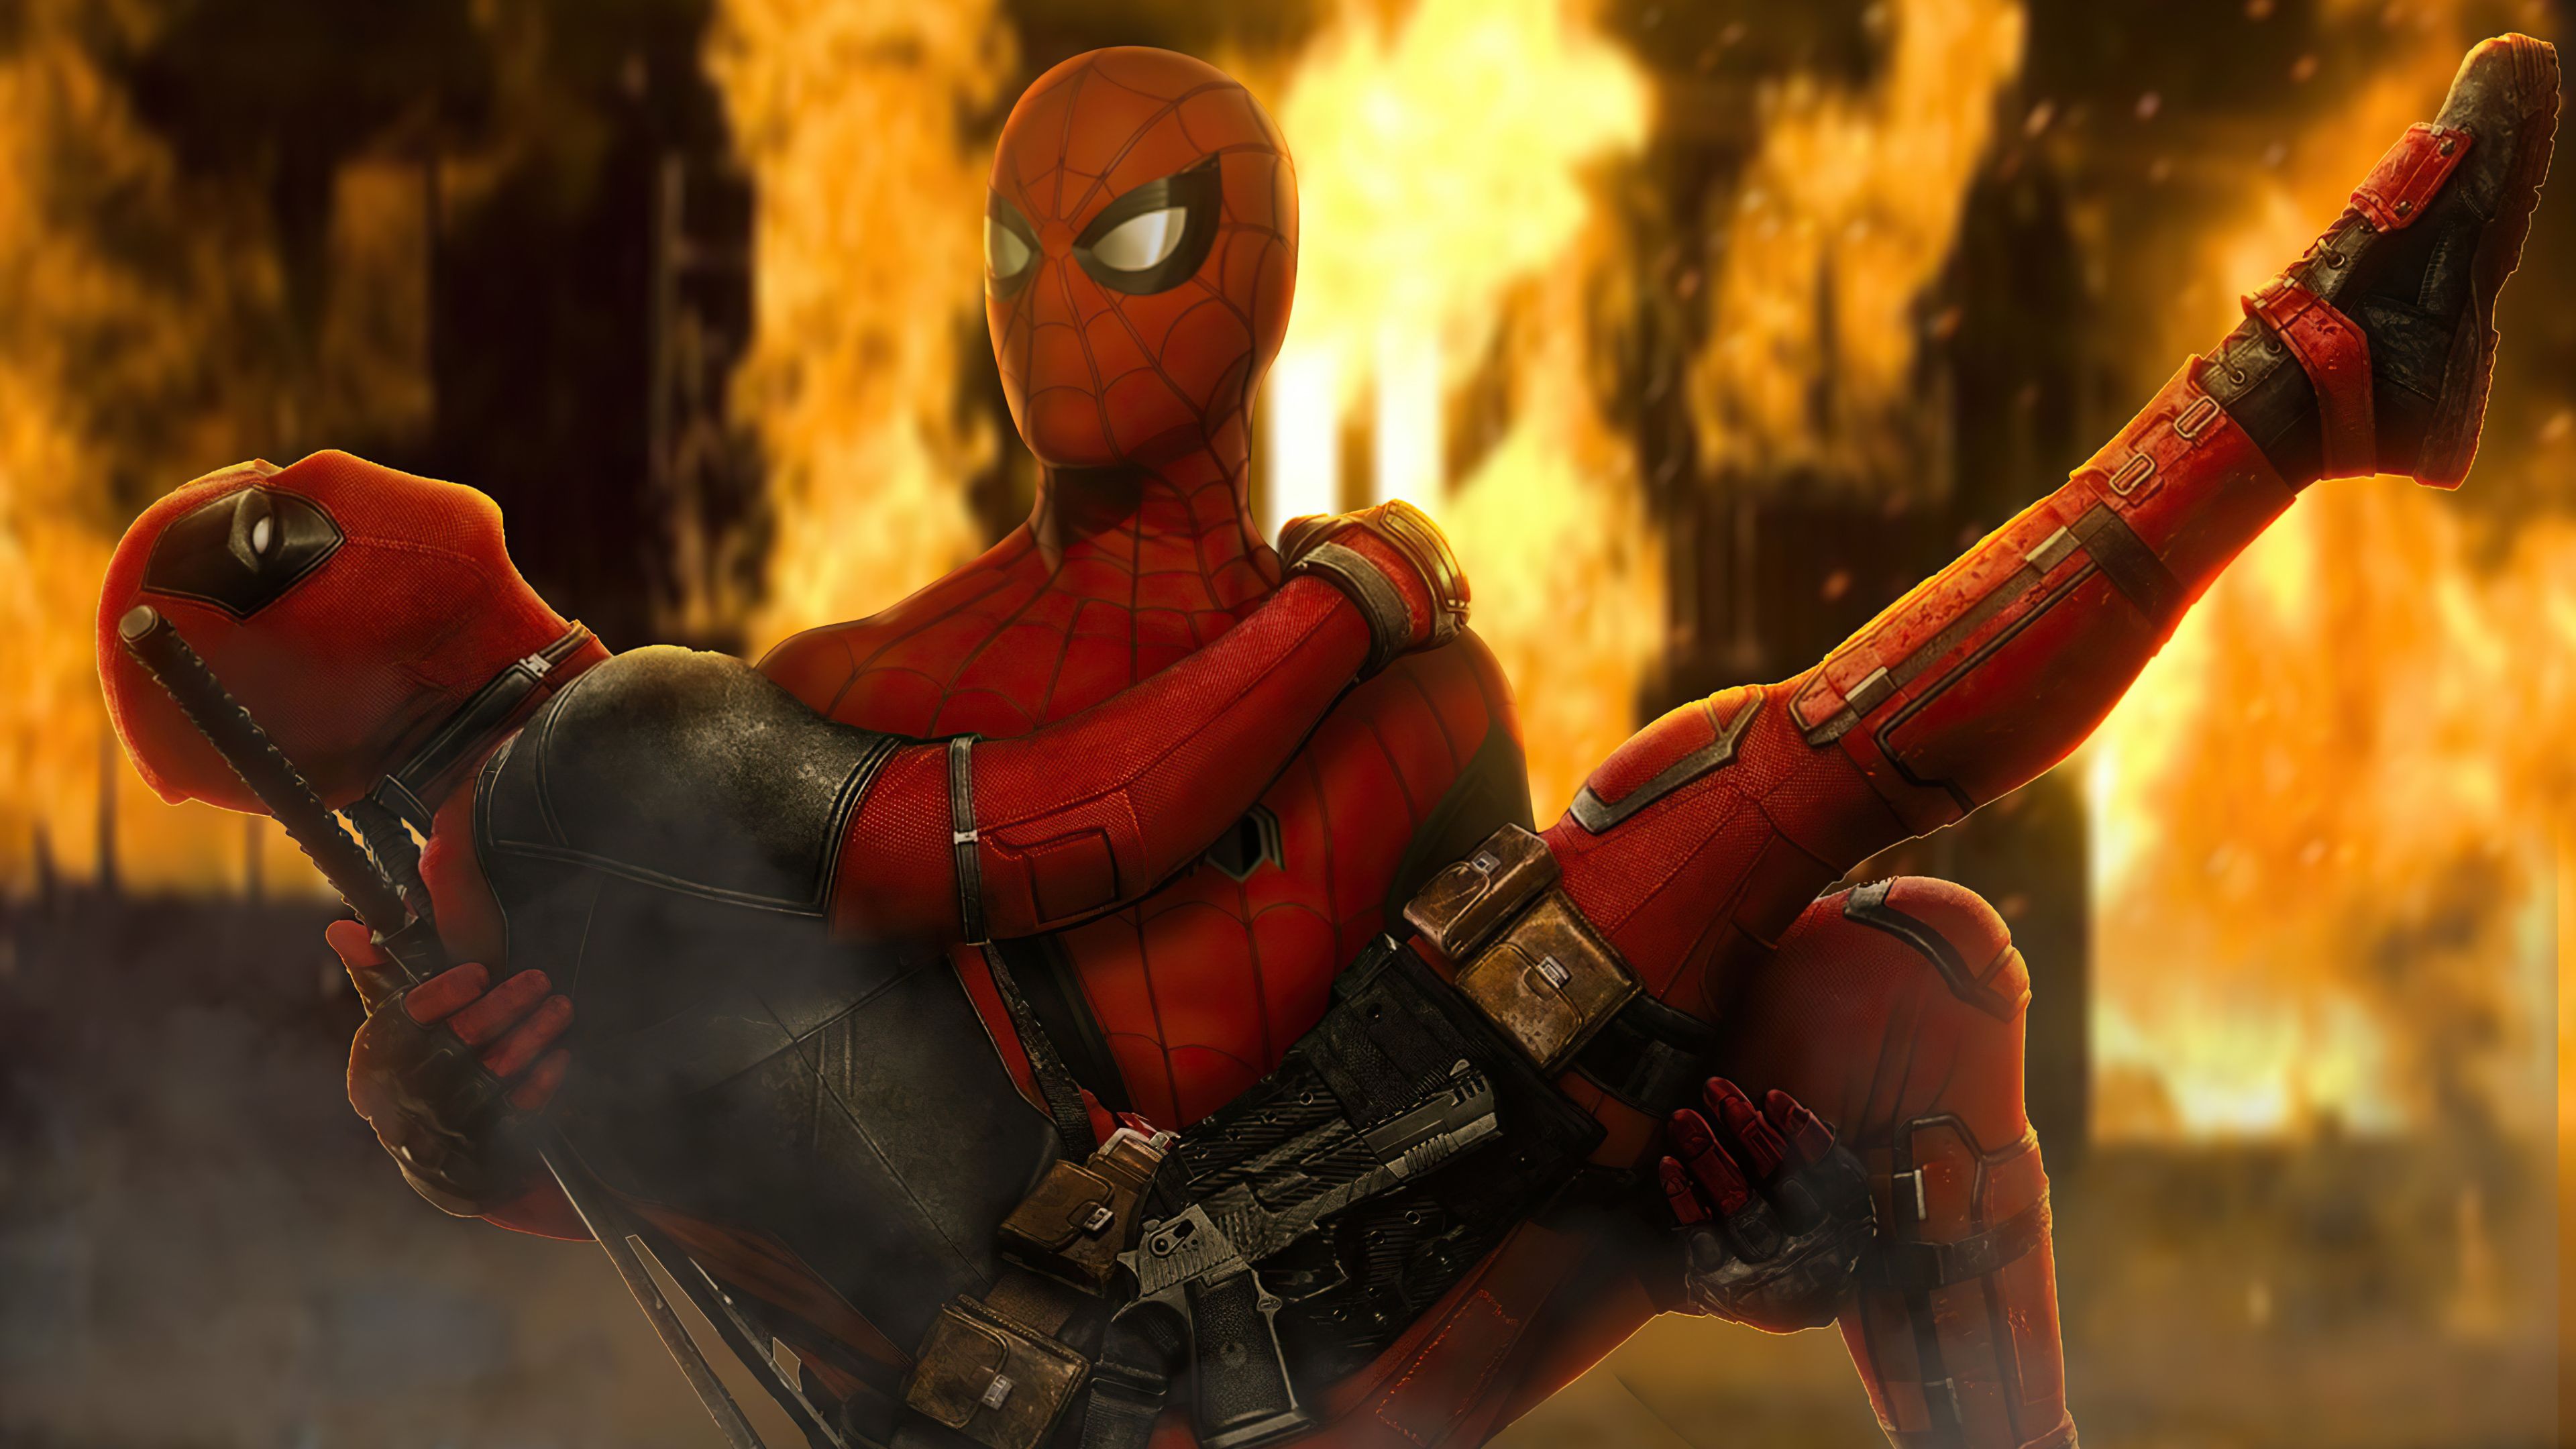 Spiderman Holding Deadpool, HD Superheroes, 4k Wallpaper, Image, Background, Photo and Picture